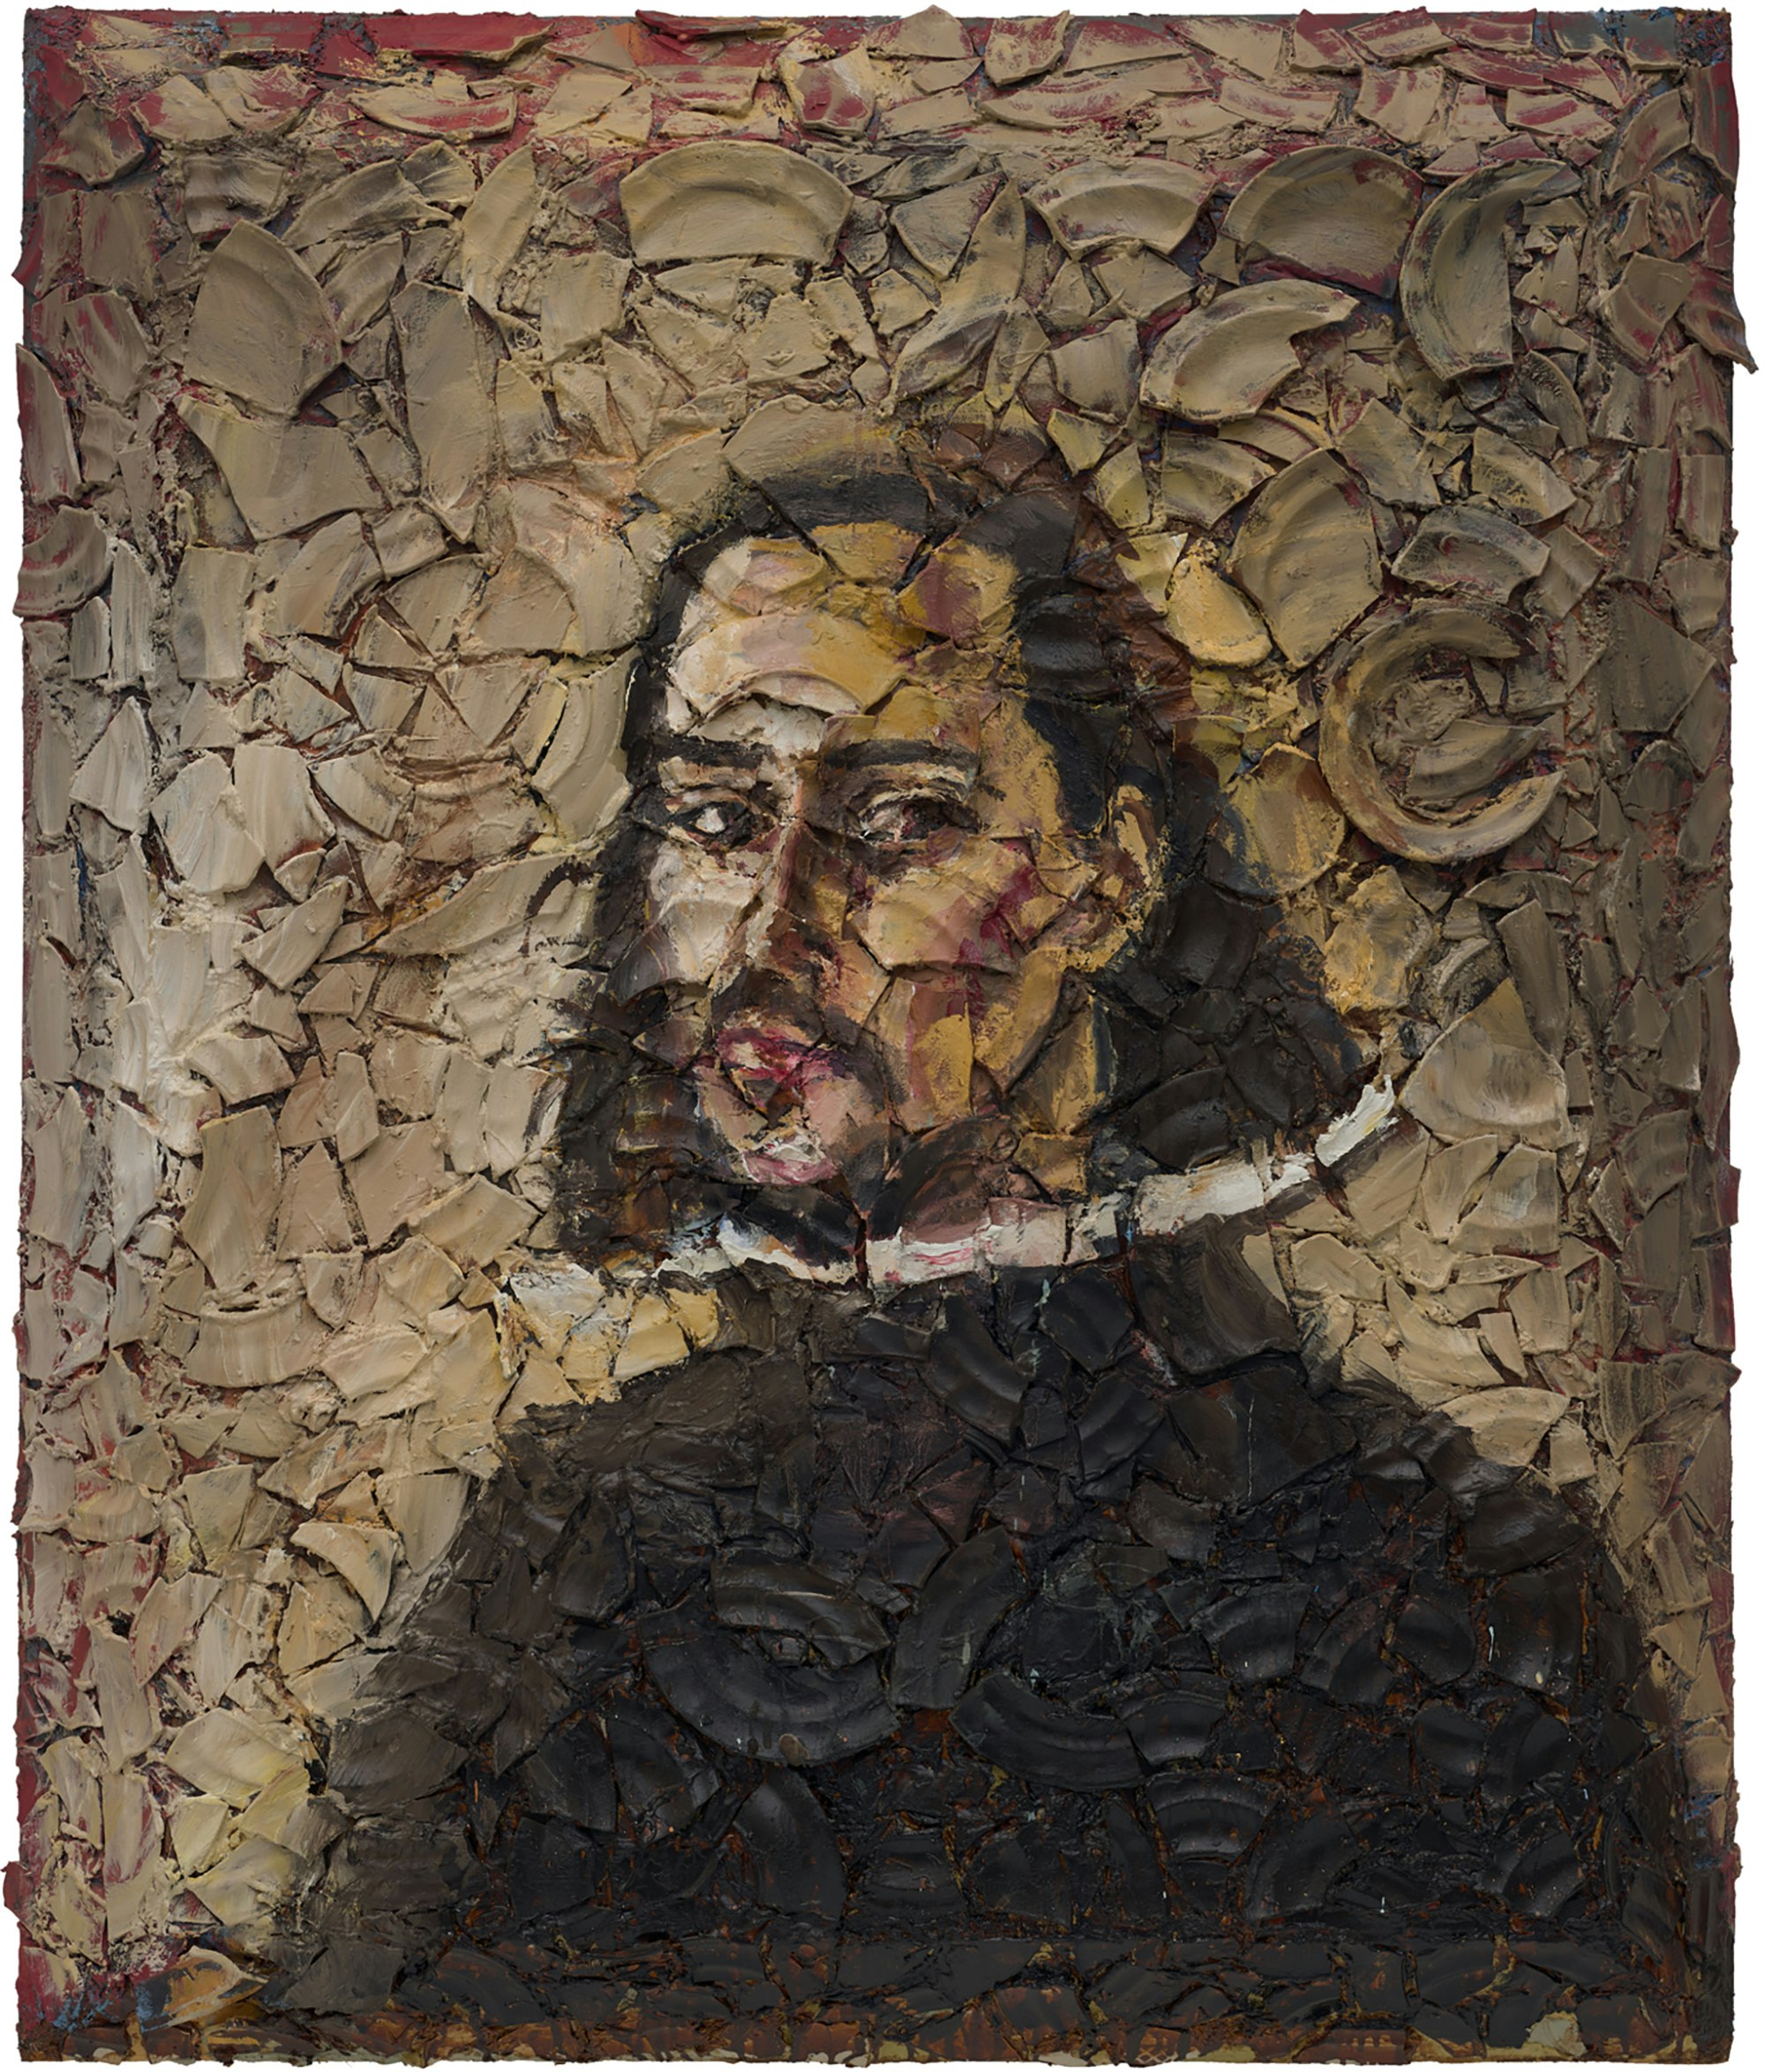 Julian Schnabel, <em>Number 1 (Velazquez Self-Portrait, Cy)</em>, 2019. Oil, plates and bondo on wood, 72 x 60 inches. Courtesy Pace Gallery.